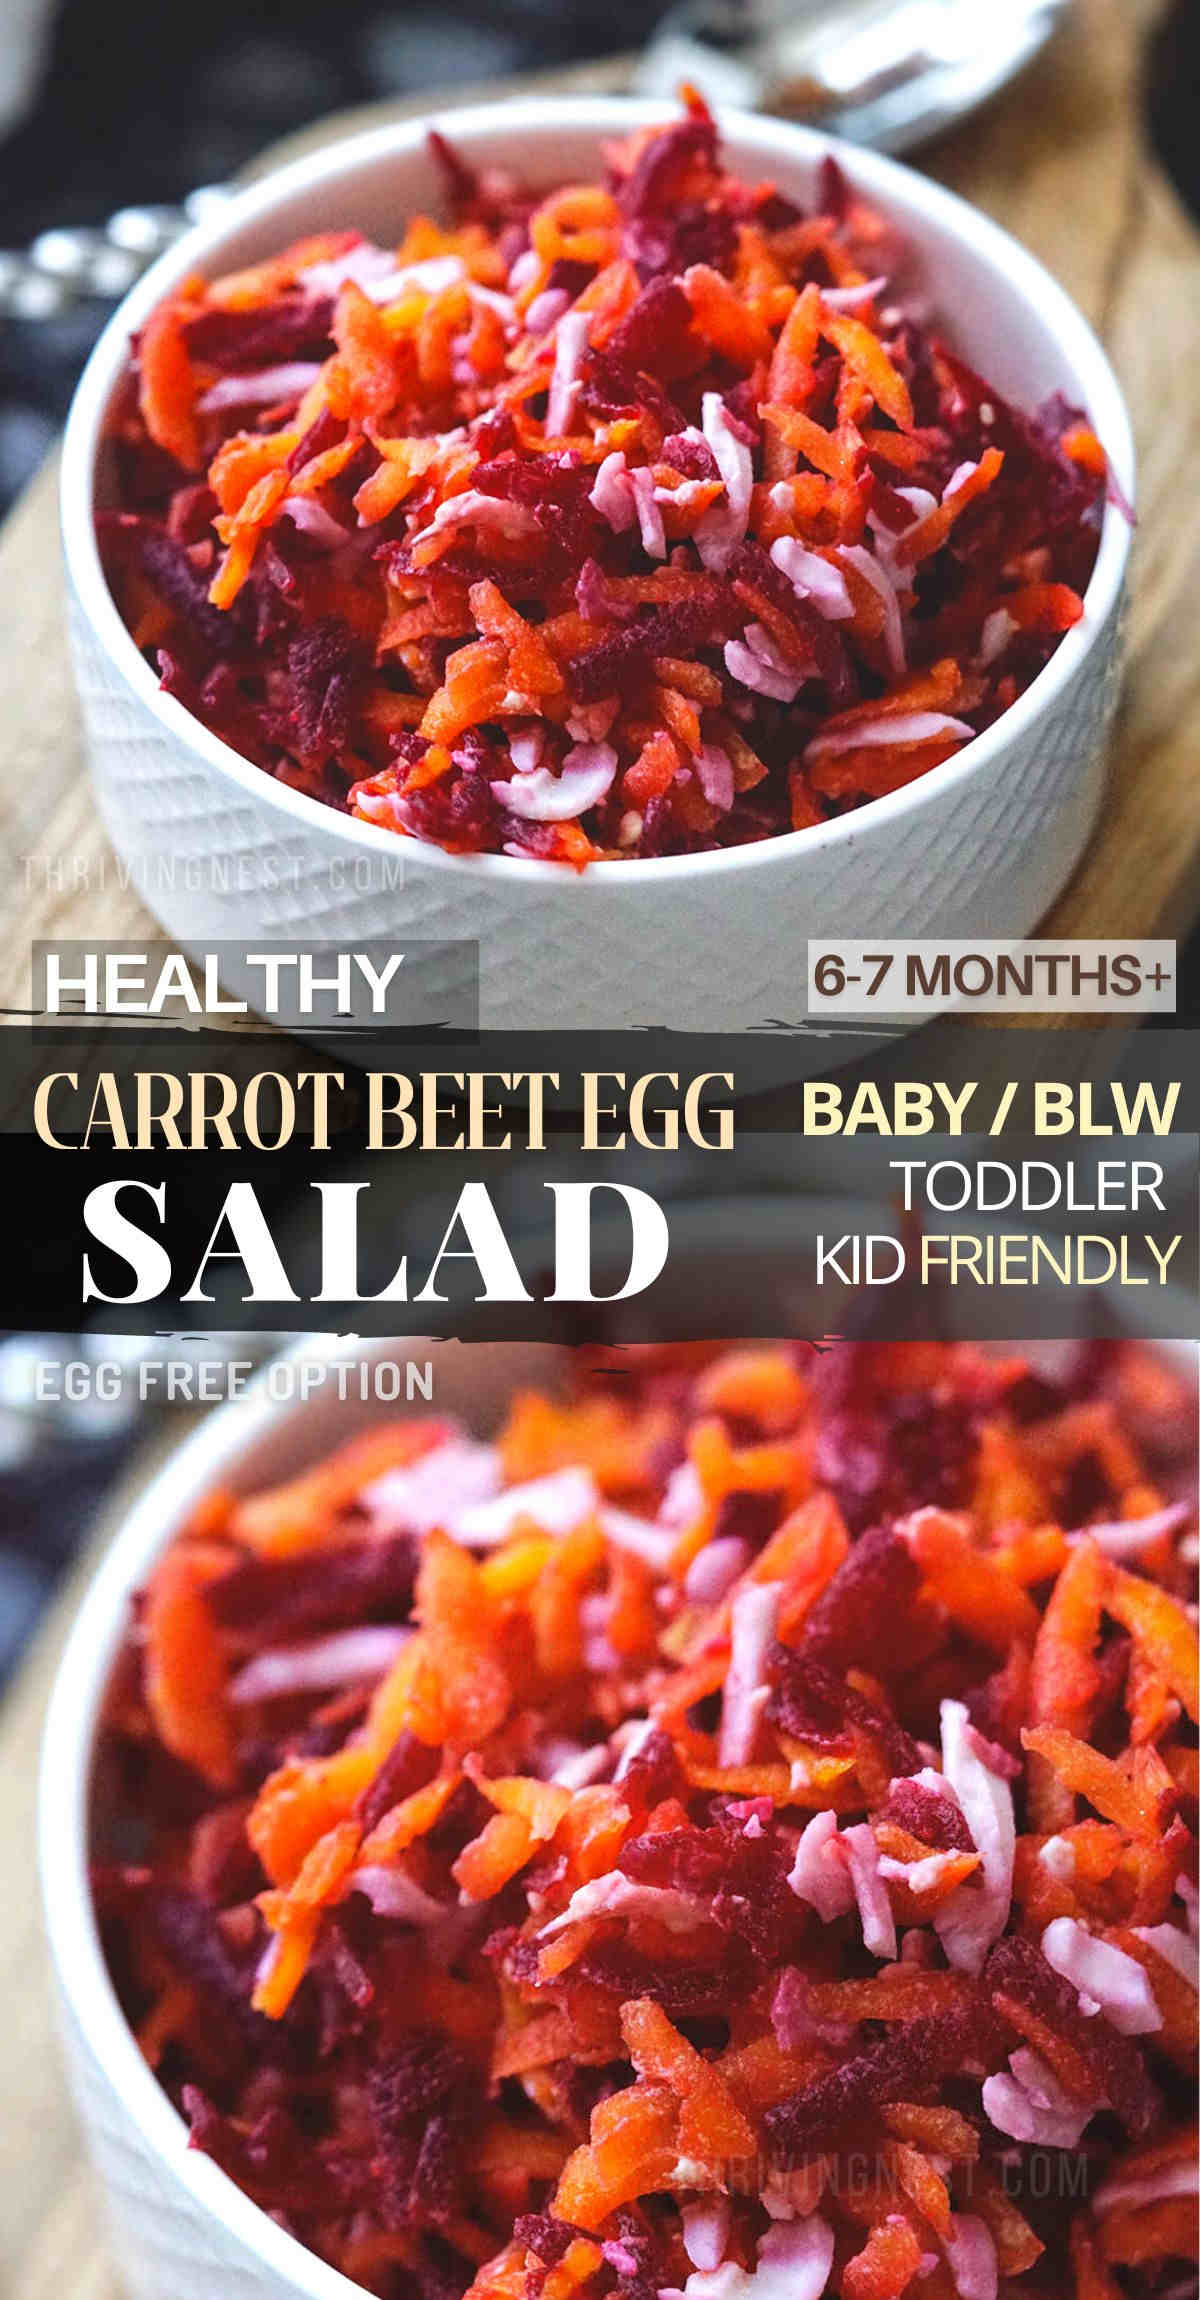 This salad recipe features soft cooked carrots and beets adding boiled eggs as the protein, then grated and lightly seasoned. This veggie salad is great for toddlers, baby led weaning (6-7 months and up) and kid friendly - as a meal or side dish. #babysalad #toddlersalad #kidsalad #veggiesalad #recipes #blw #kidfriendly